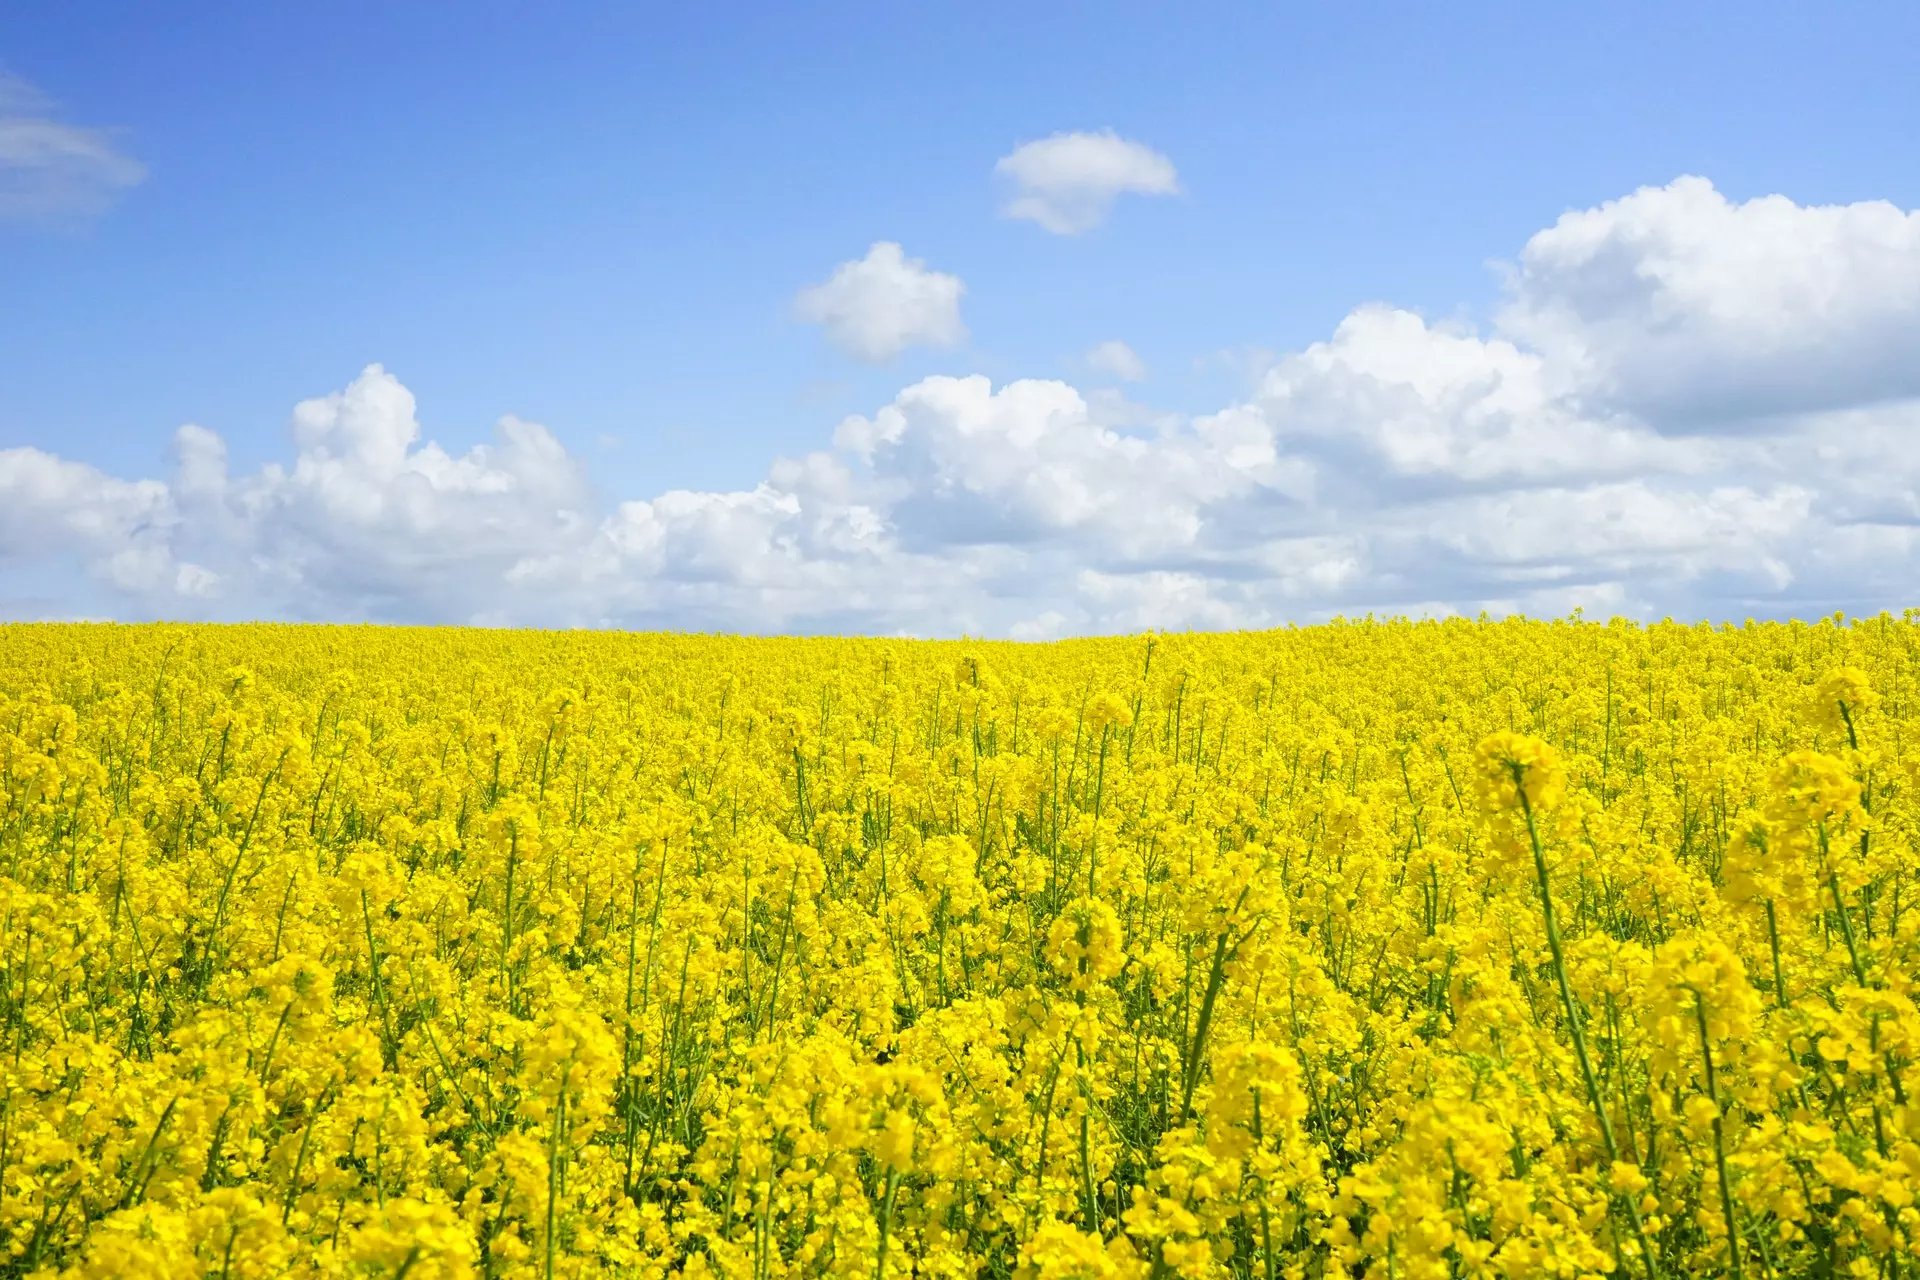 Does this field of flowers trigger your allergies